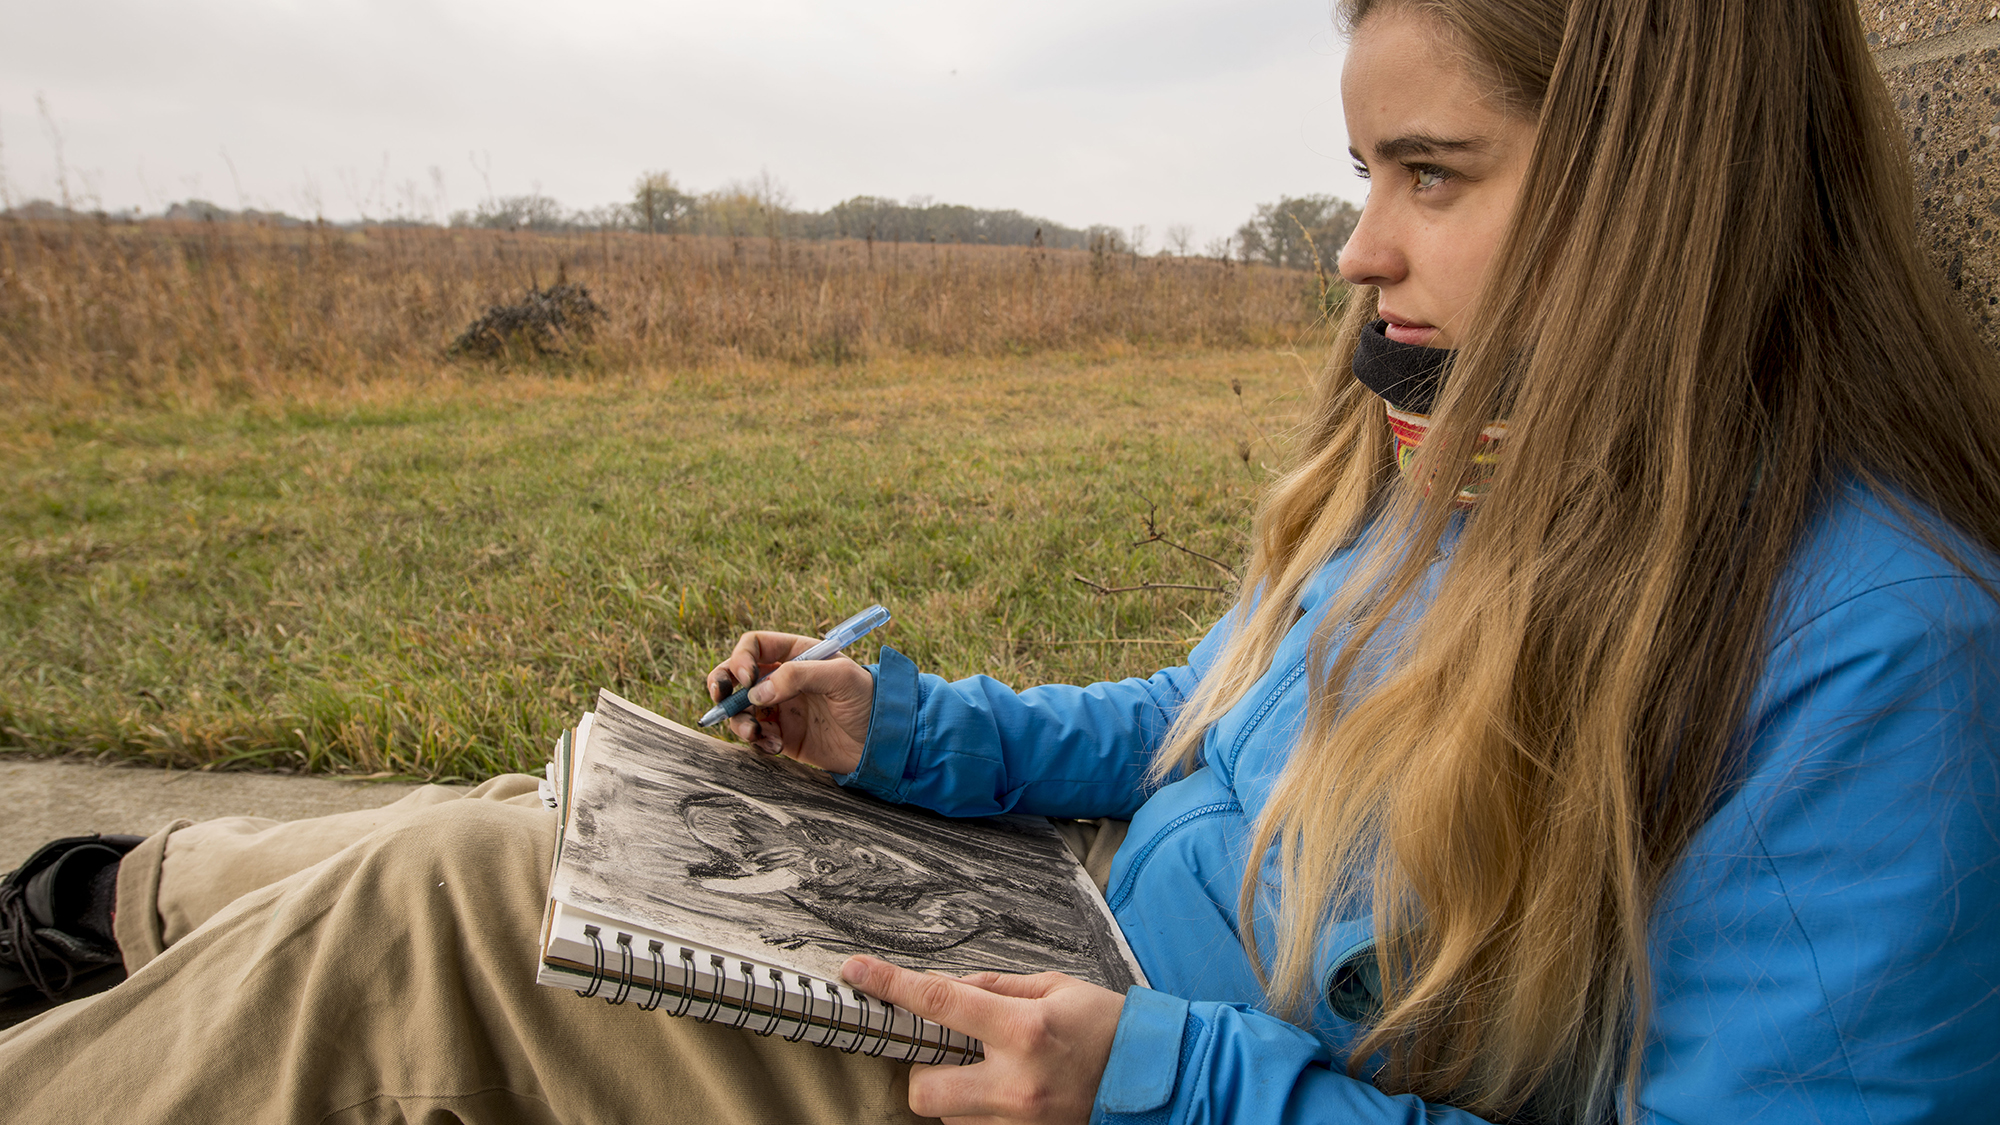 Students in Lee Running, Associate Professor of Art, drawing class use observational drawing techniques during a trip to the Conrad Evironmental Research Area